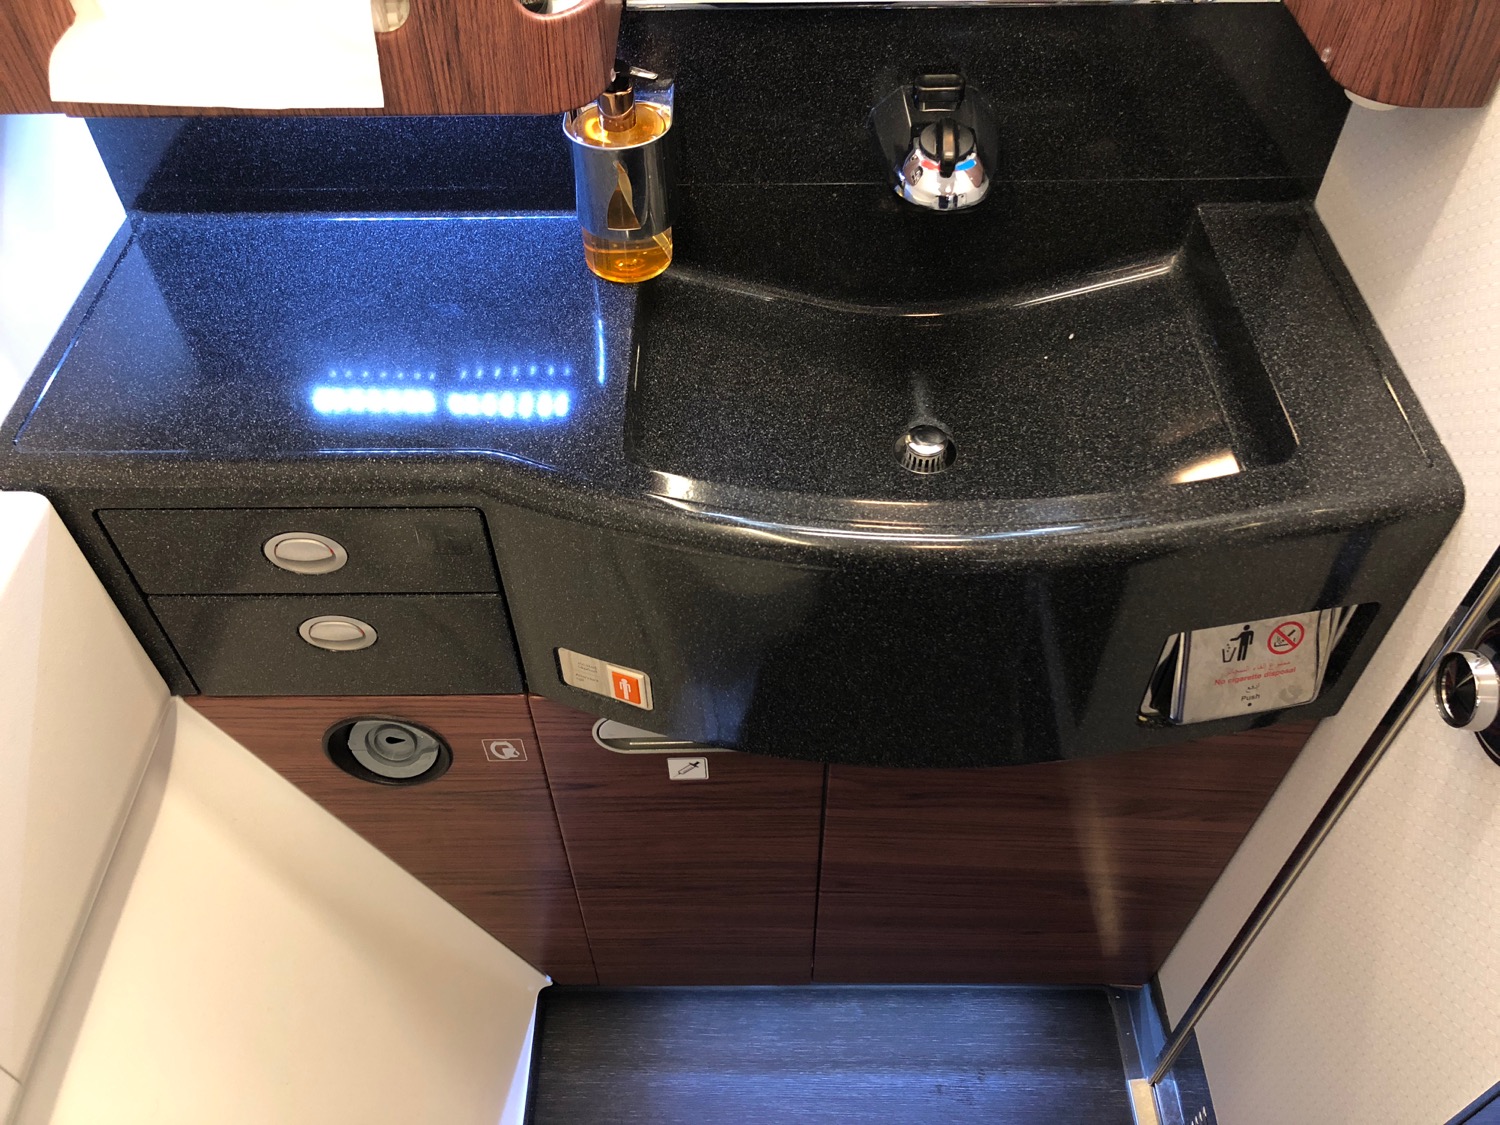 a sink with a faucet and a bottle on the counter